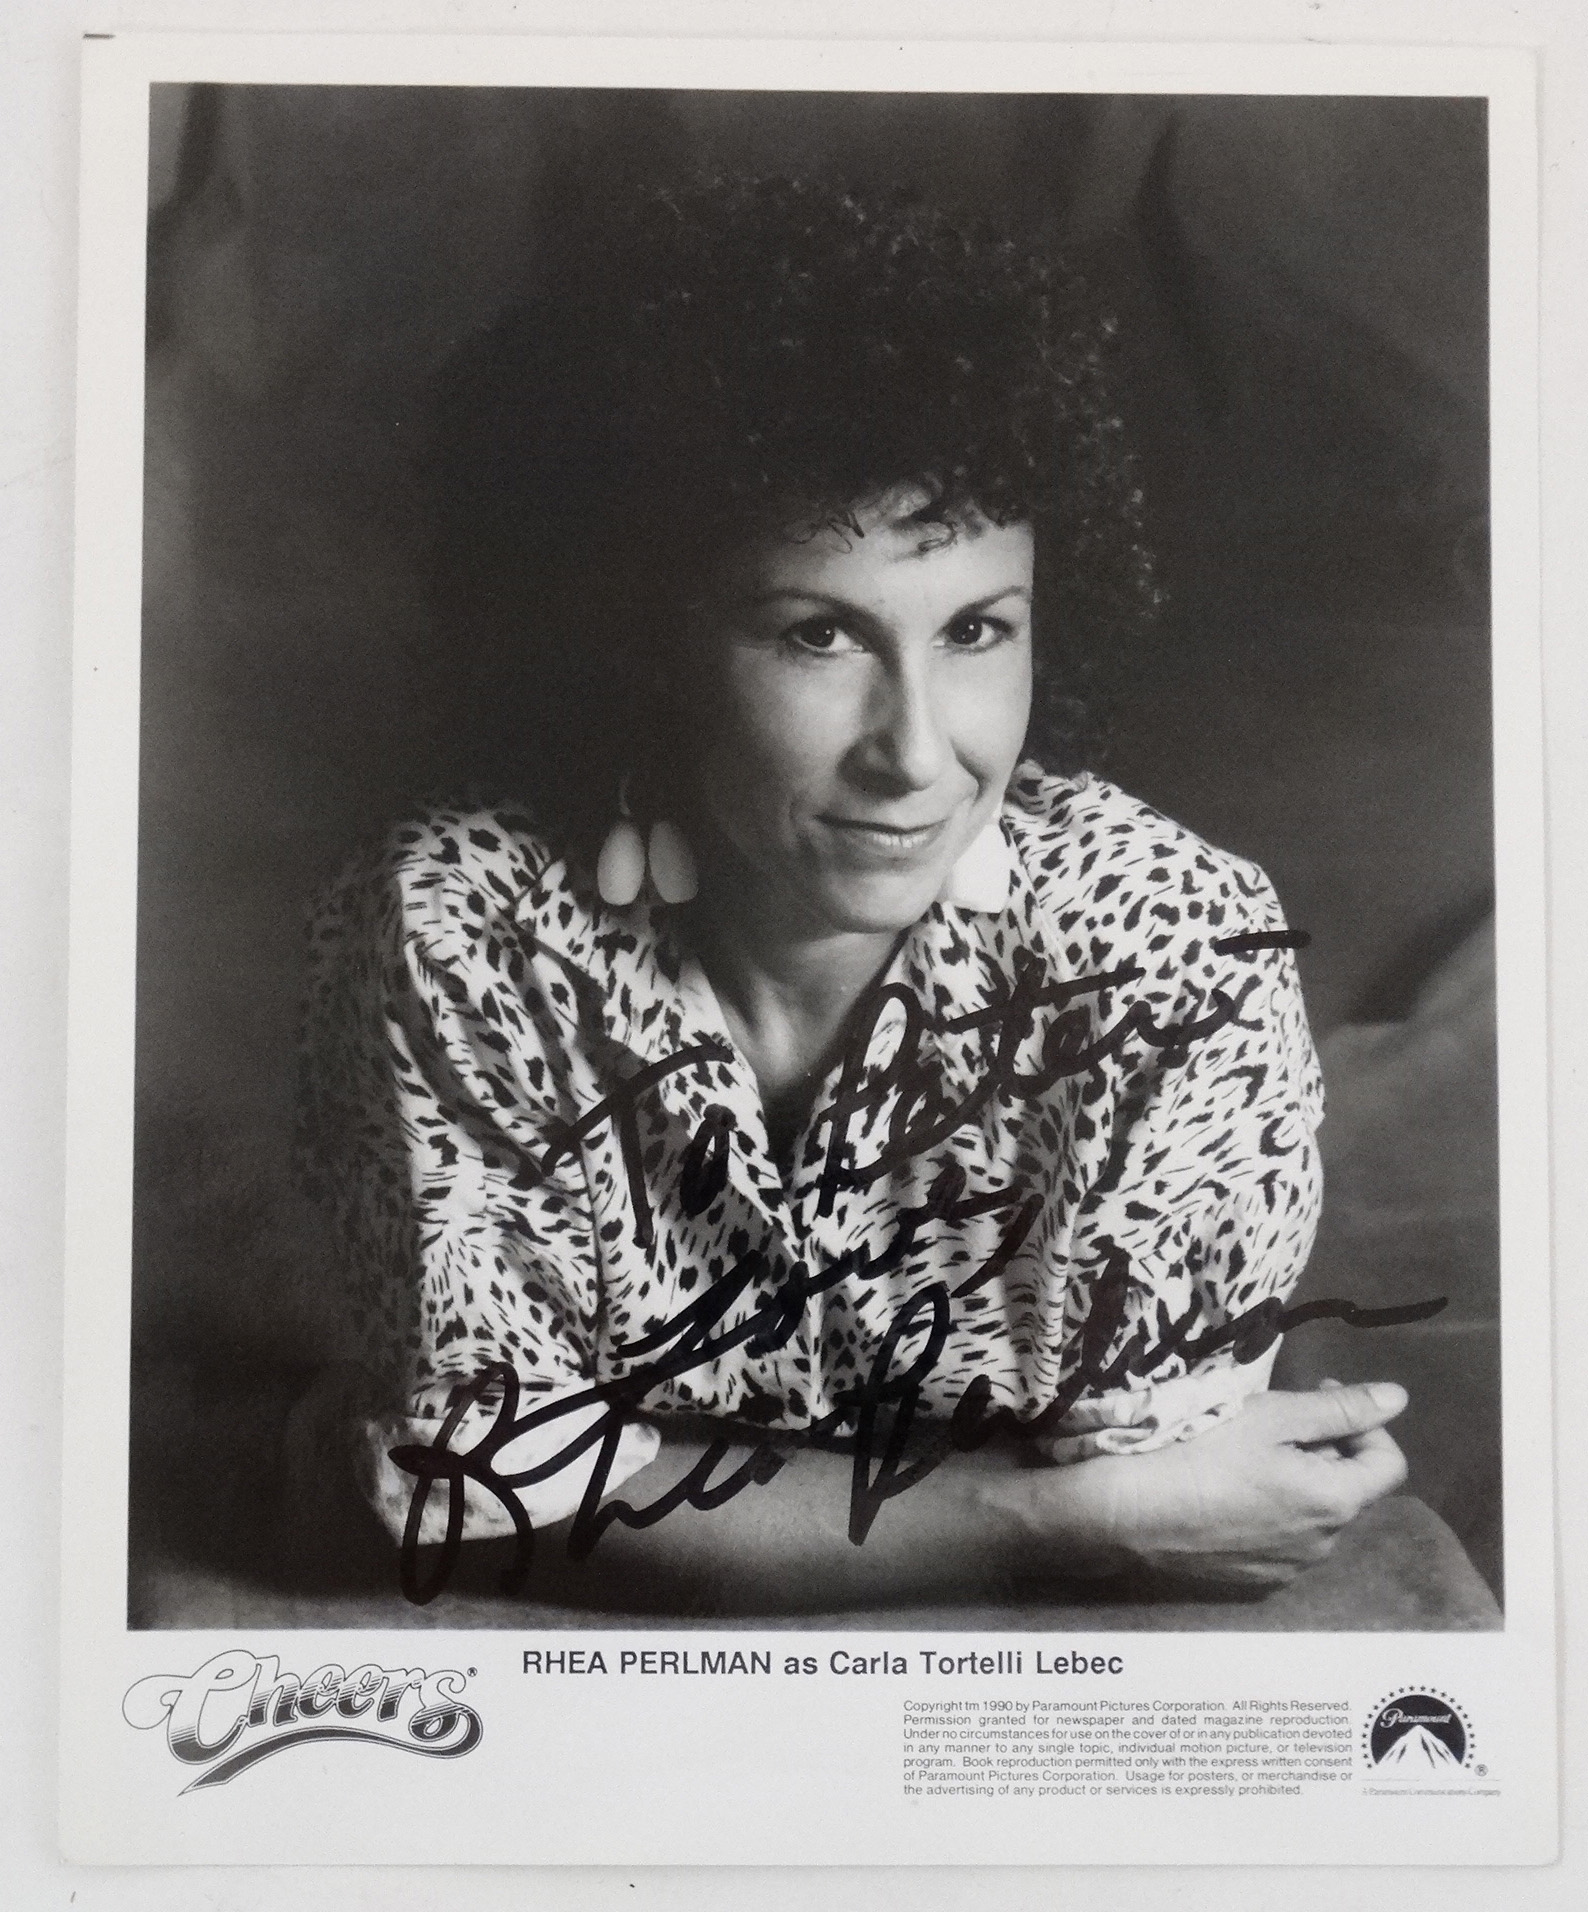 Autograph: Rhea Pearlman signed black and white photographic print of Rhea Pearlman as Carla